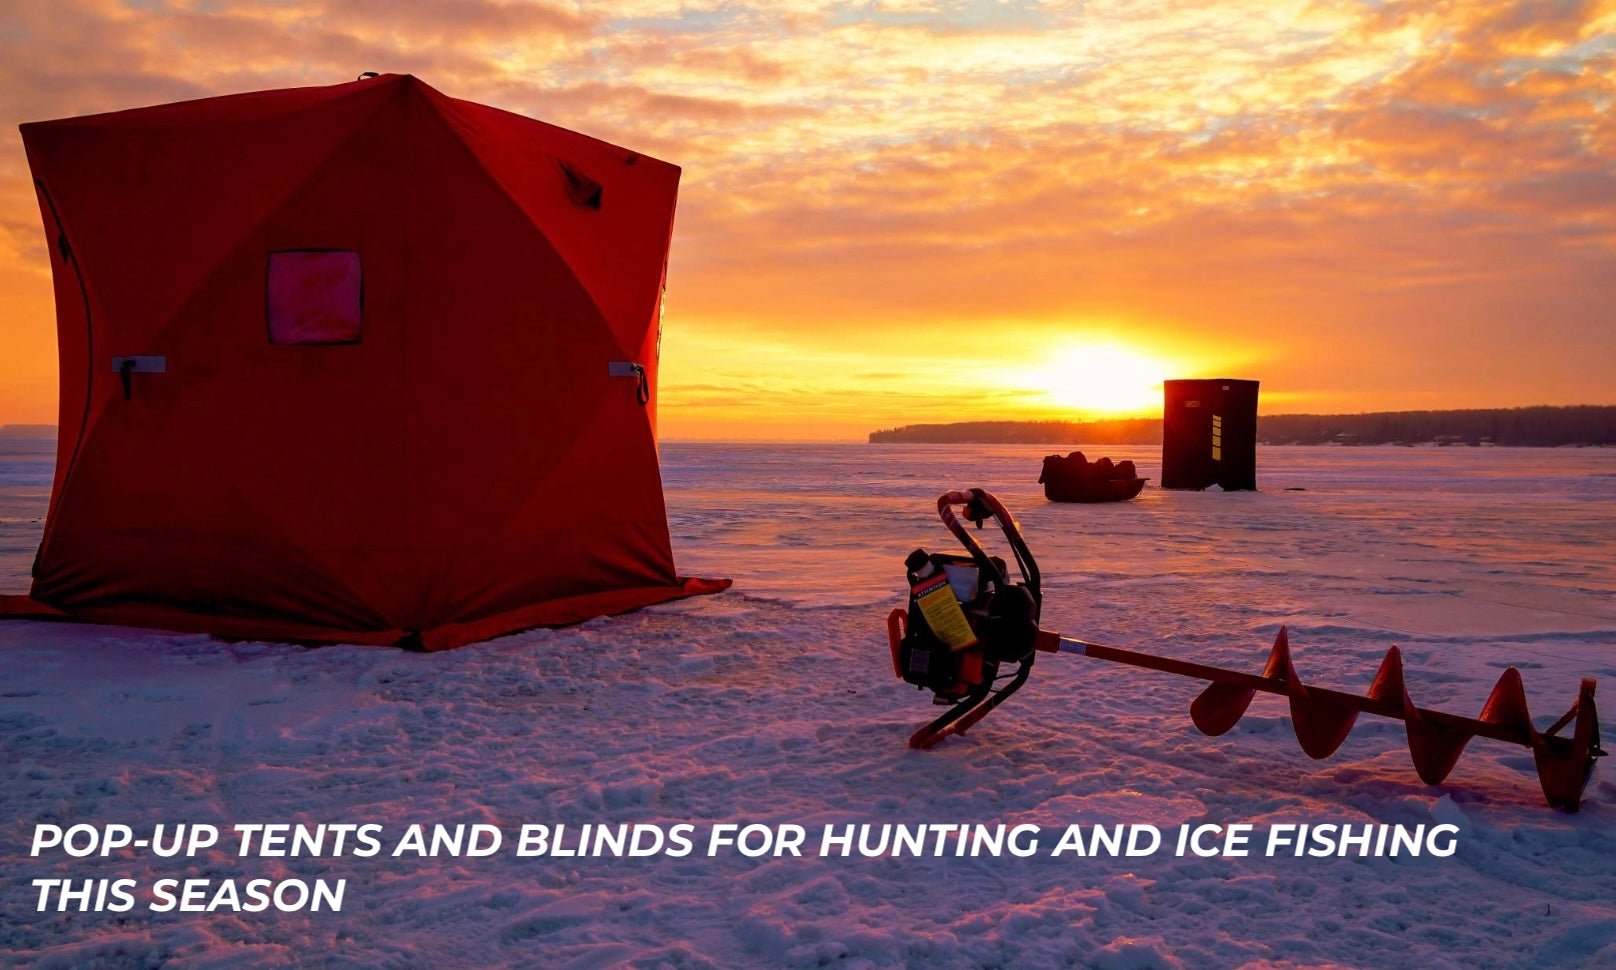 ️⃣ Pop-up tents and blinds for hunting and ice fishing this season